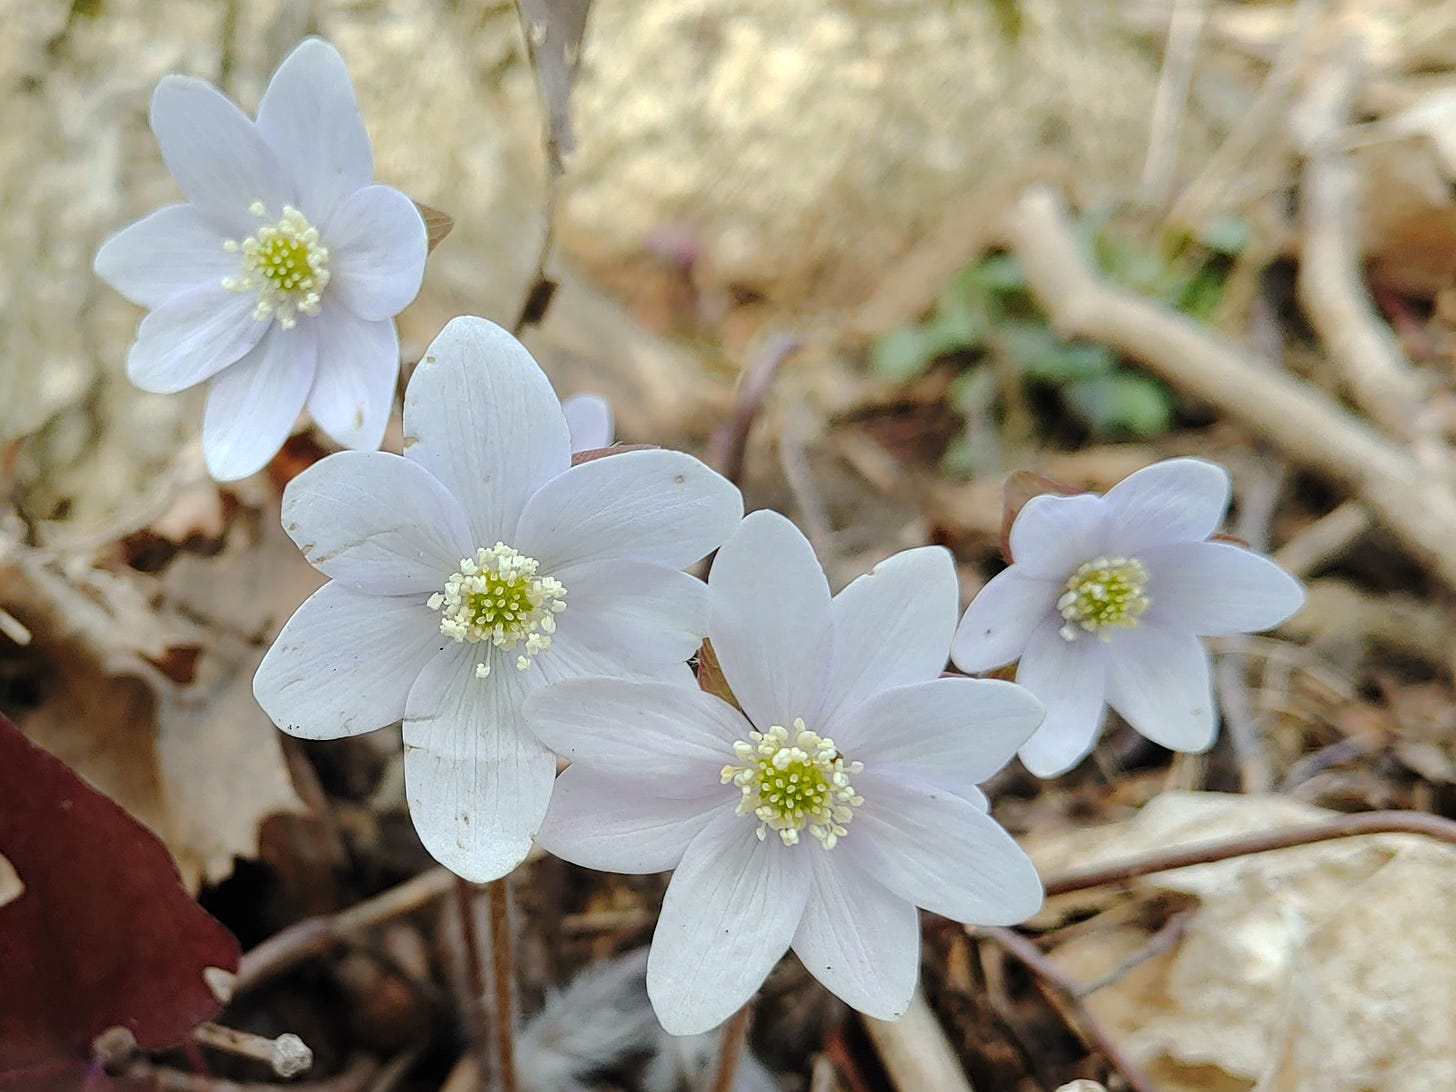 Hepatica wildflowers seen on nature walk through a forest in spring.